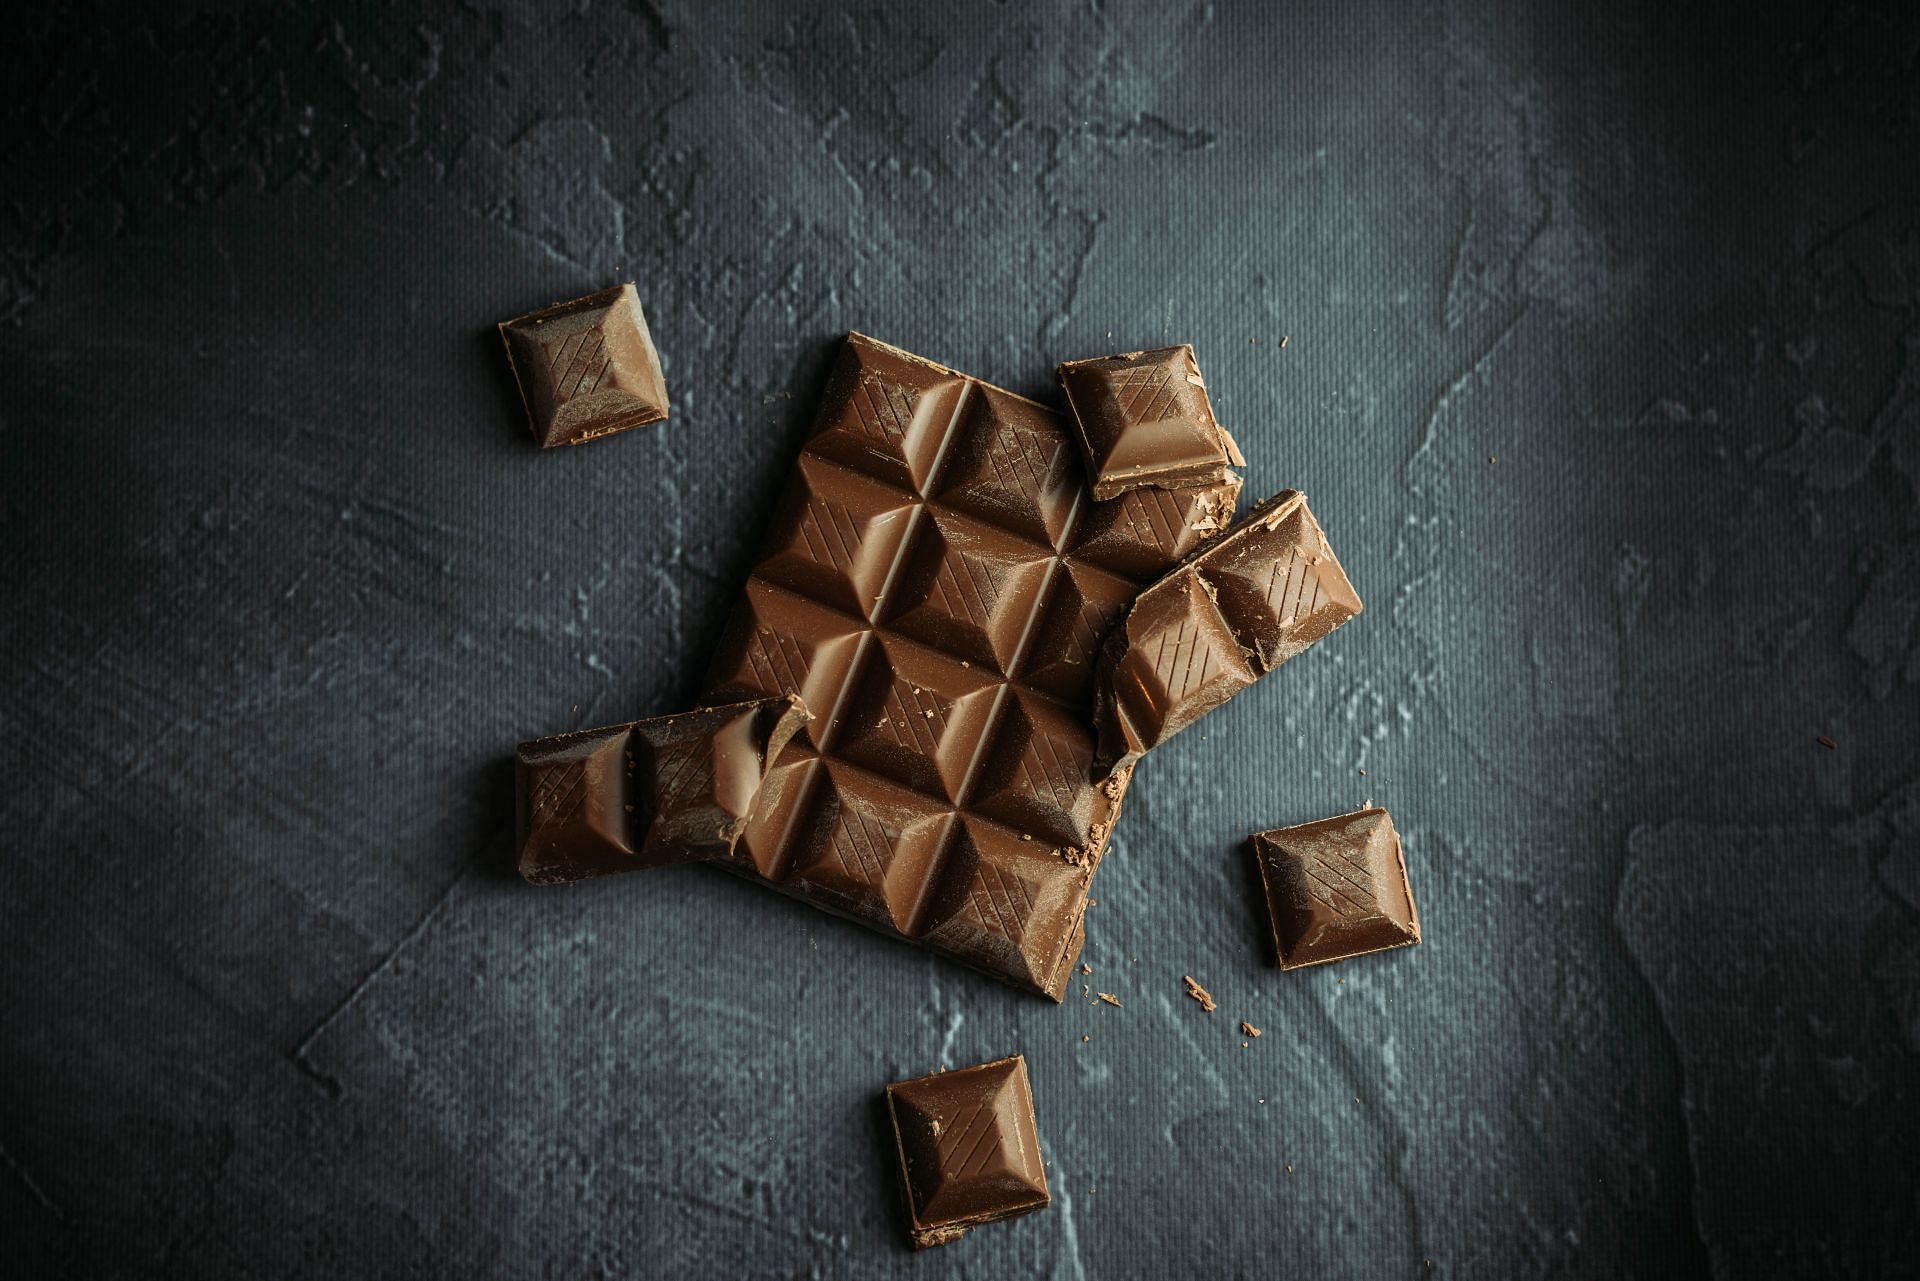 Dark chocolate, with a cocoa content of 70 to 85 percent, contains about 65 milligrams (mg) of magnesium per ounce. (Image via Unsplash/ Tamas Pap)